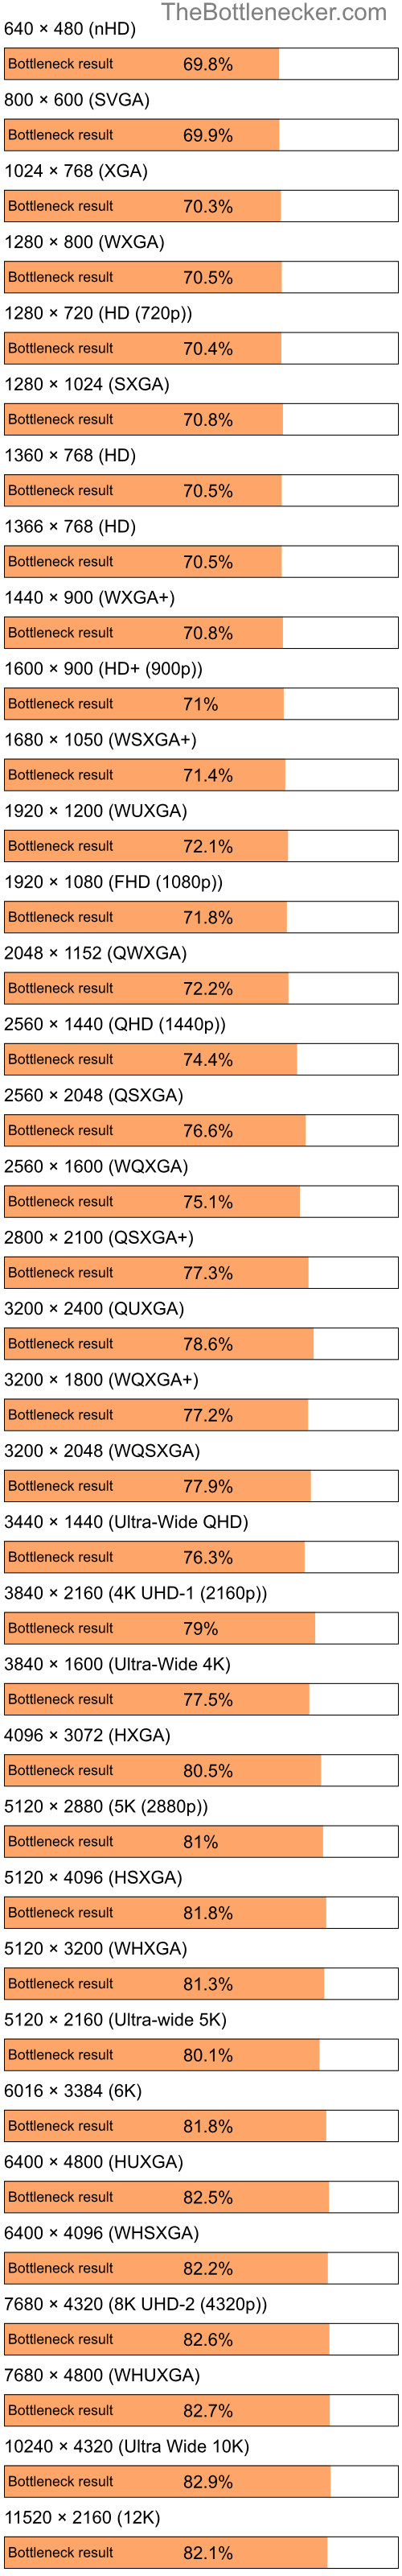 Bottleneck results by resolution for Intel Celeron M and AMD Mobility Radeon HD 4250 in Graphic Card Intense Tasks